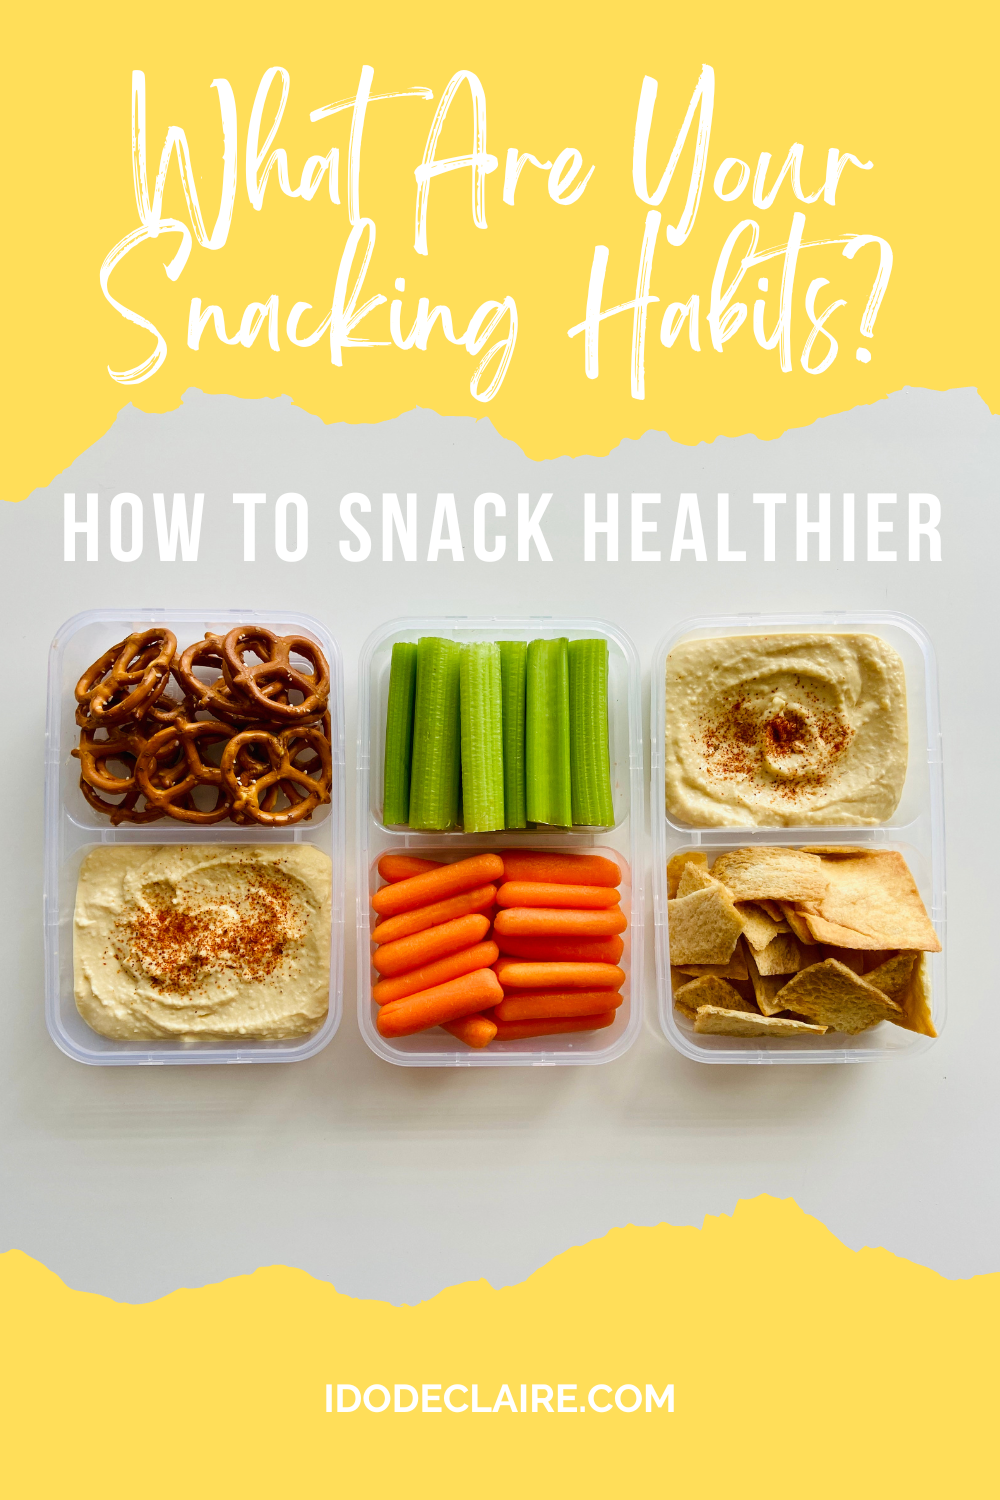 What Are Your Snacking Habits?